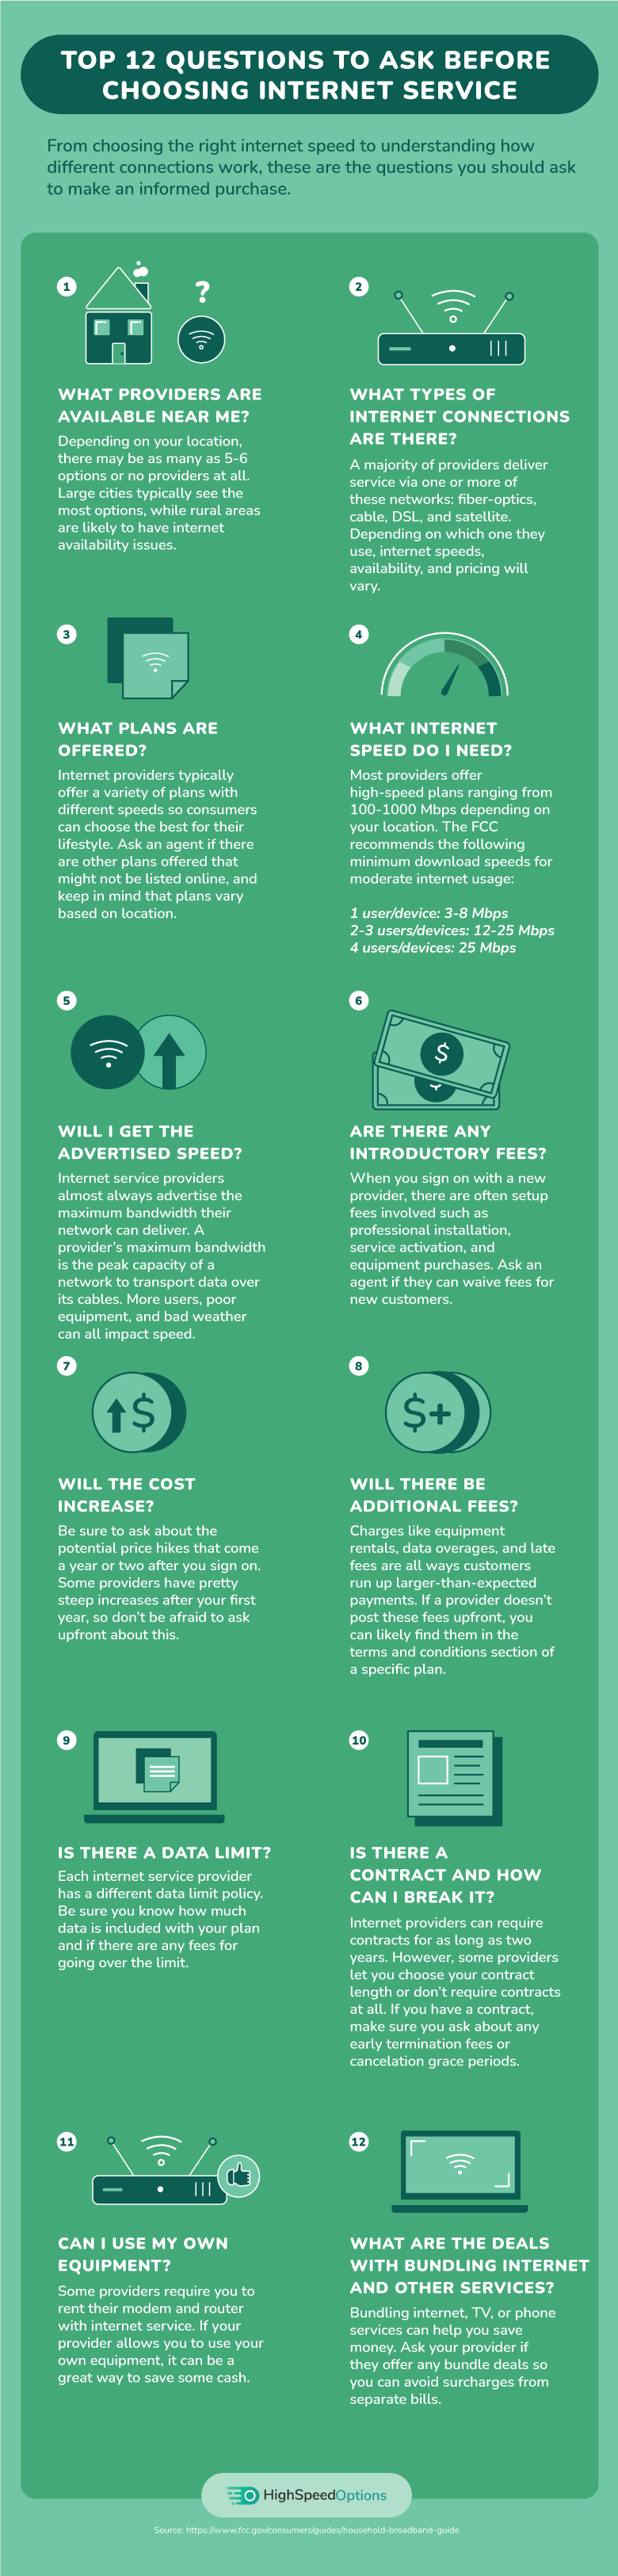 top 12 questions to ask before choosing internet service infographic